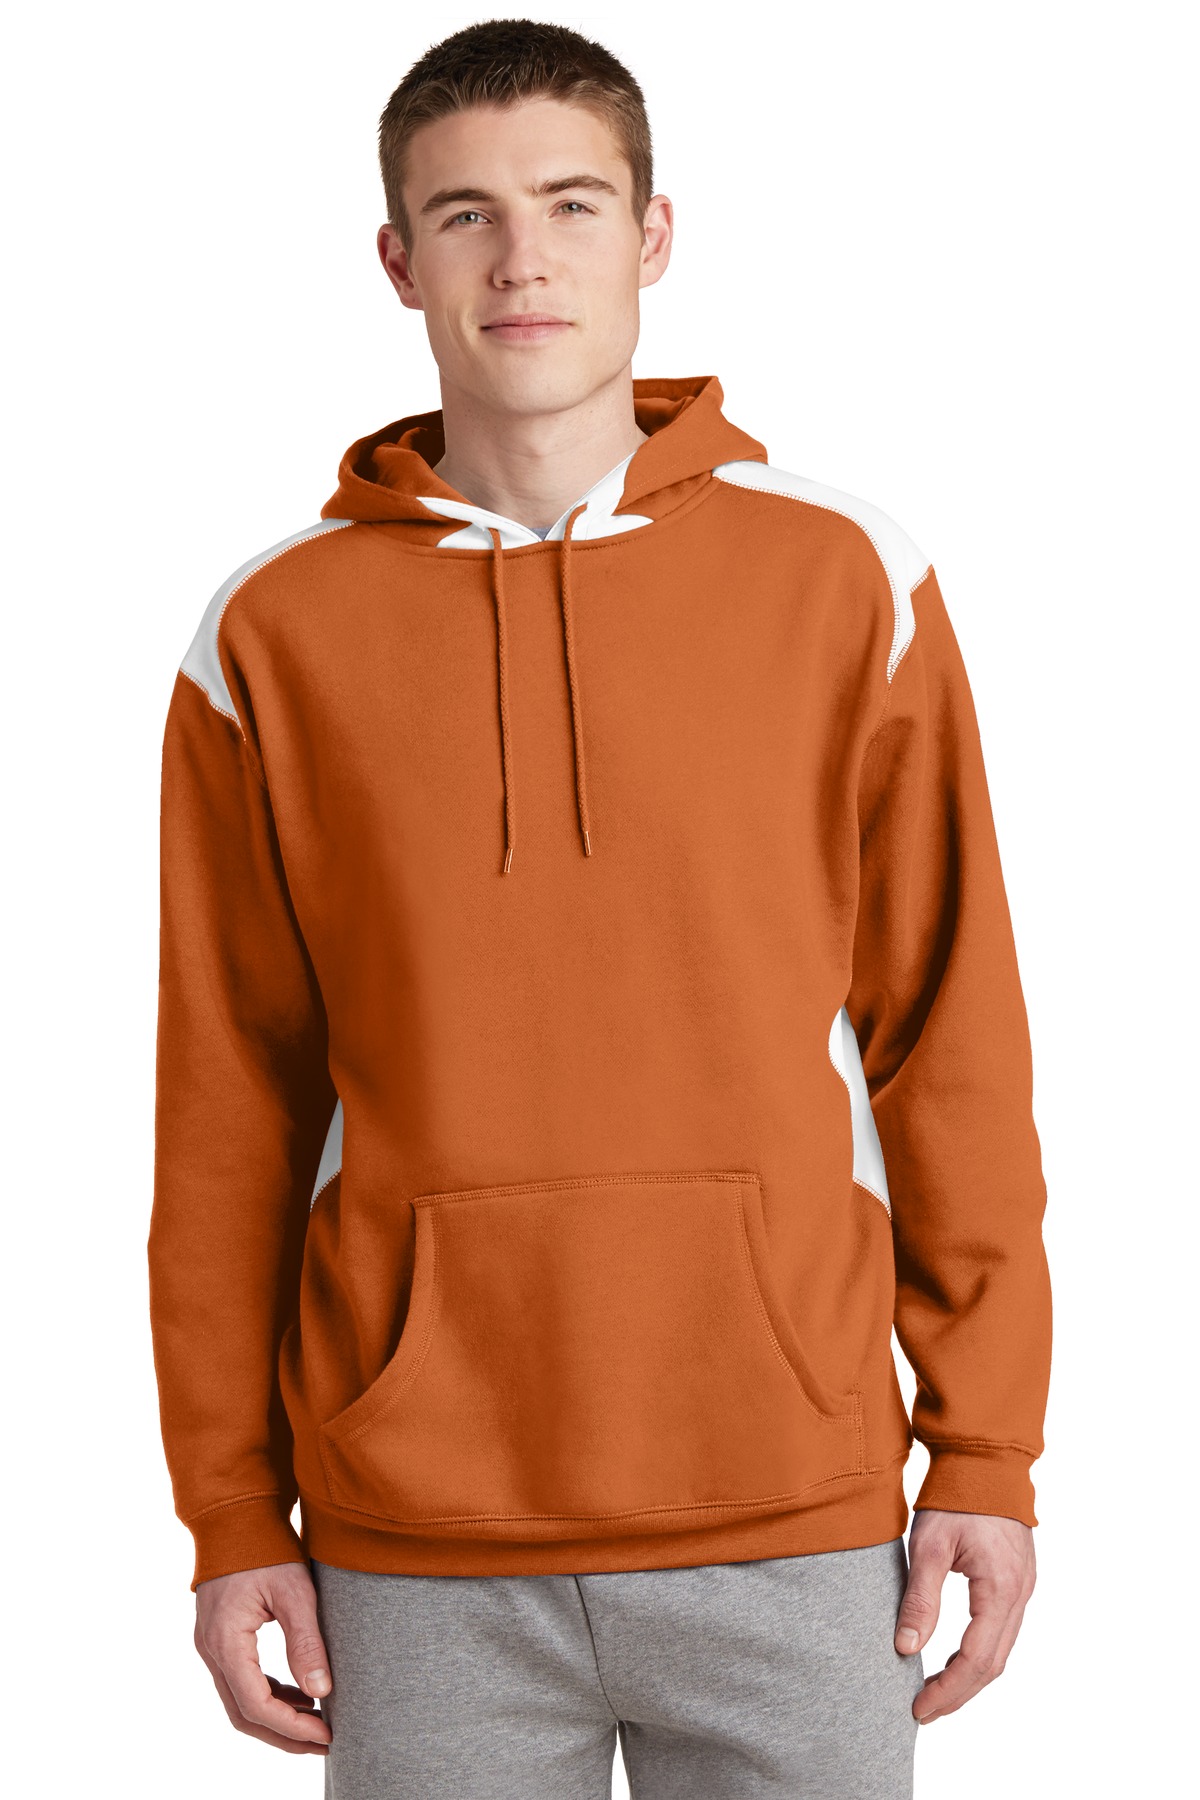 CLOSEOUT Sport-Tek Pullover Hooded Sweatshirt with Contrast Color. F264